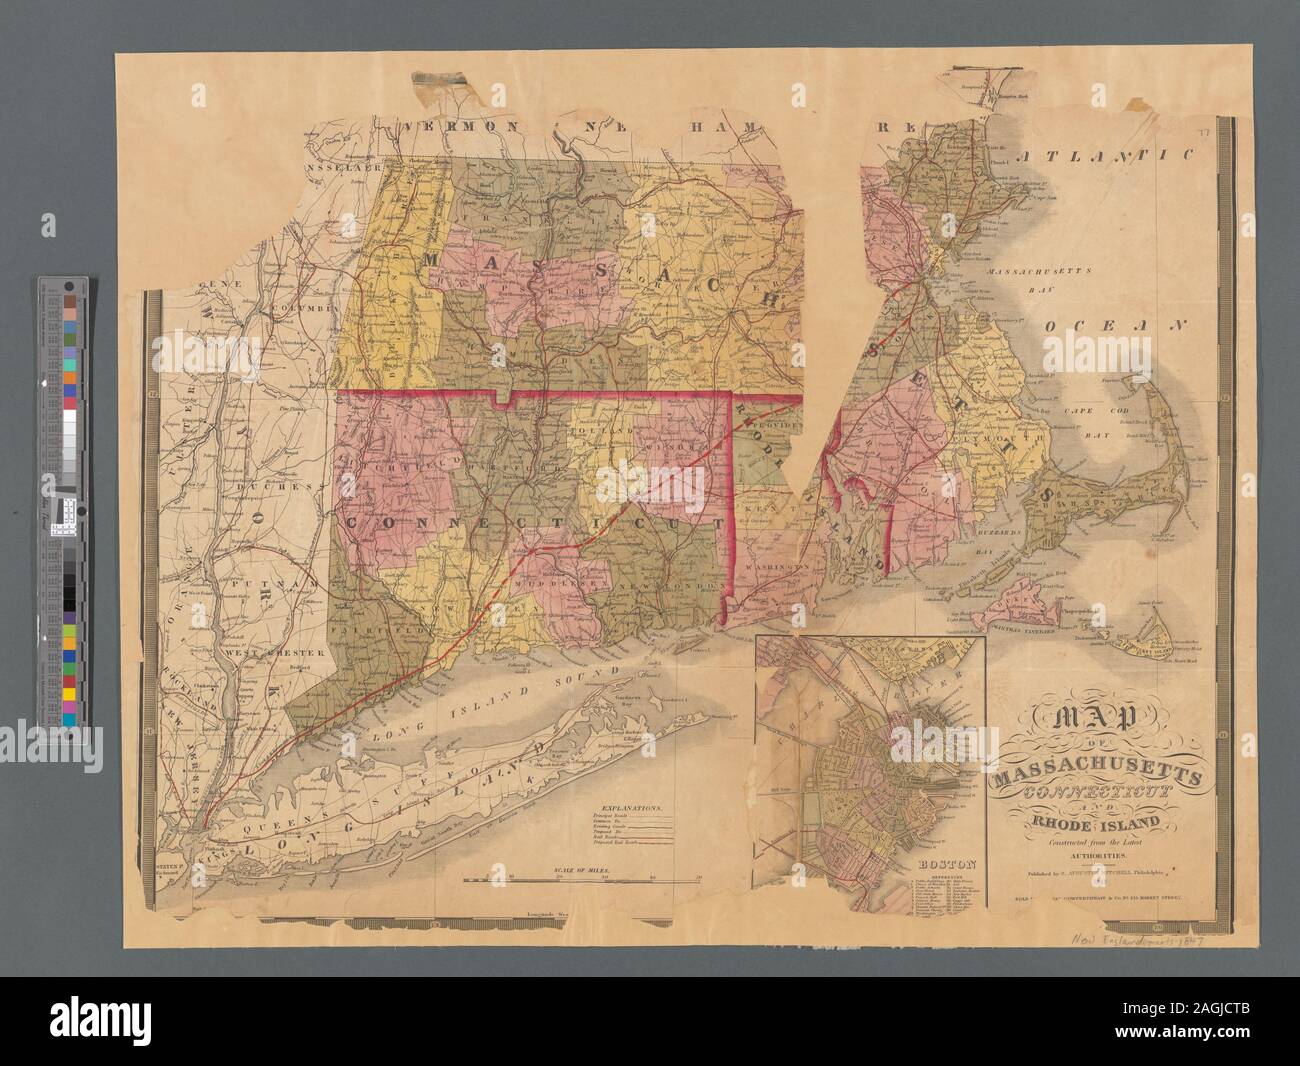 Relief shown pictorially. Also covers the Hudson River Valley to the confluence of the Mohawk, and Long Island. Shows roads, canals (actual and proposed), and railroads (actual and proposed). Longitude in degrees west from Greenwich and east from Washington, D.C. Colored by county; borders of states in red. Includes inset map of Boston, colored by ward, with its own scale and key. Mapping the Nation (NEH grant, 2015-2018); Map of Massachusetts, Connecticut and Rhode Island Stock Photo